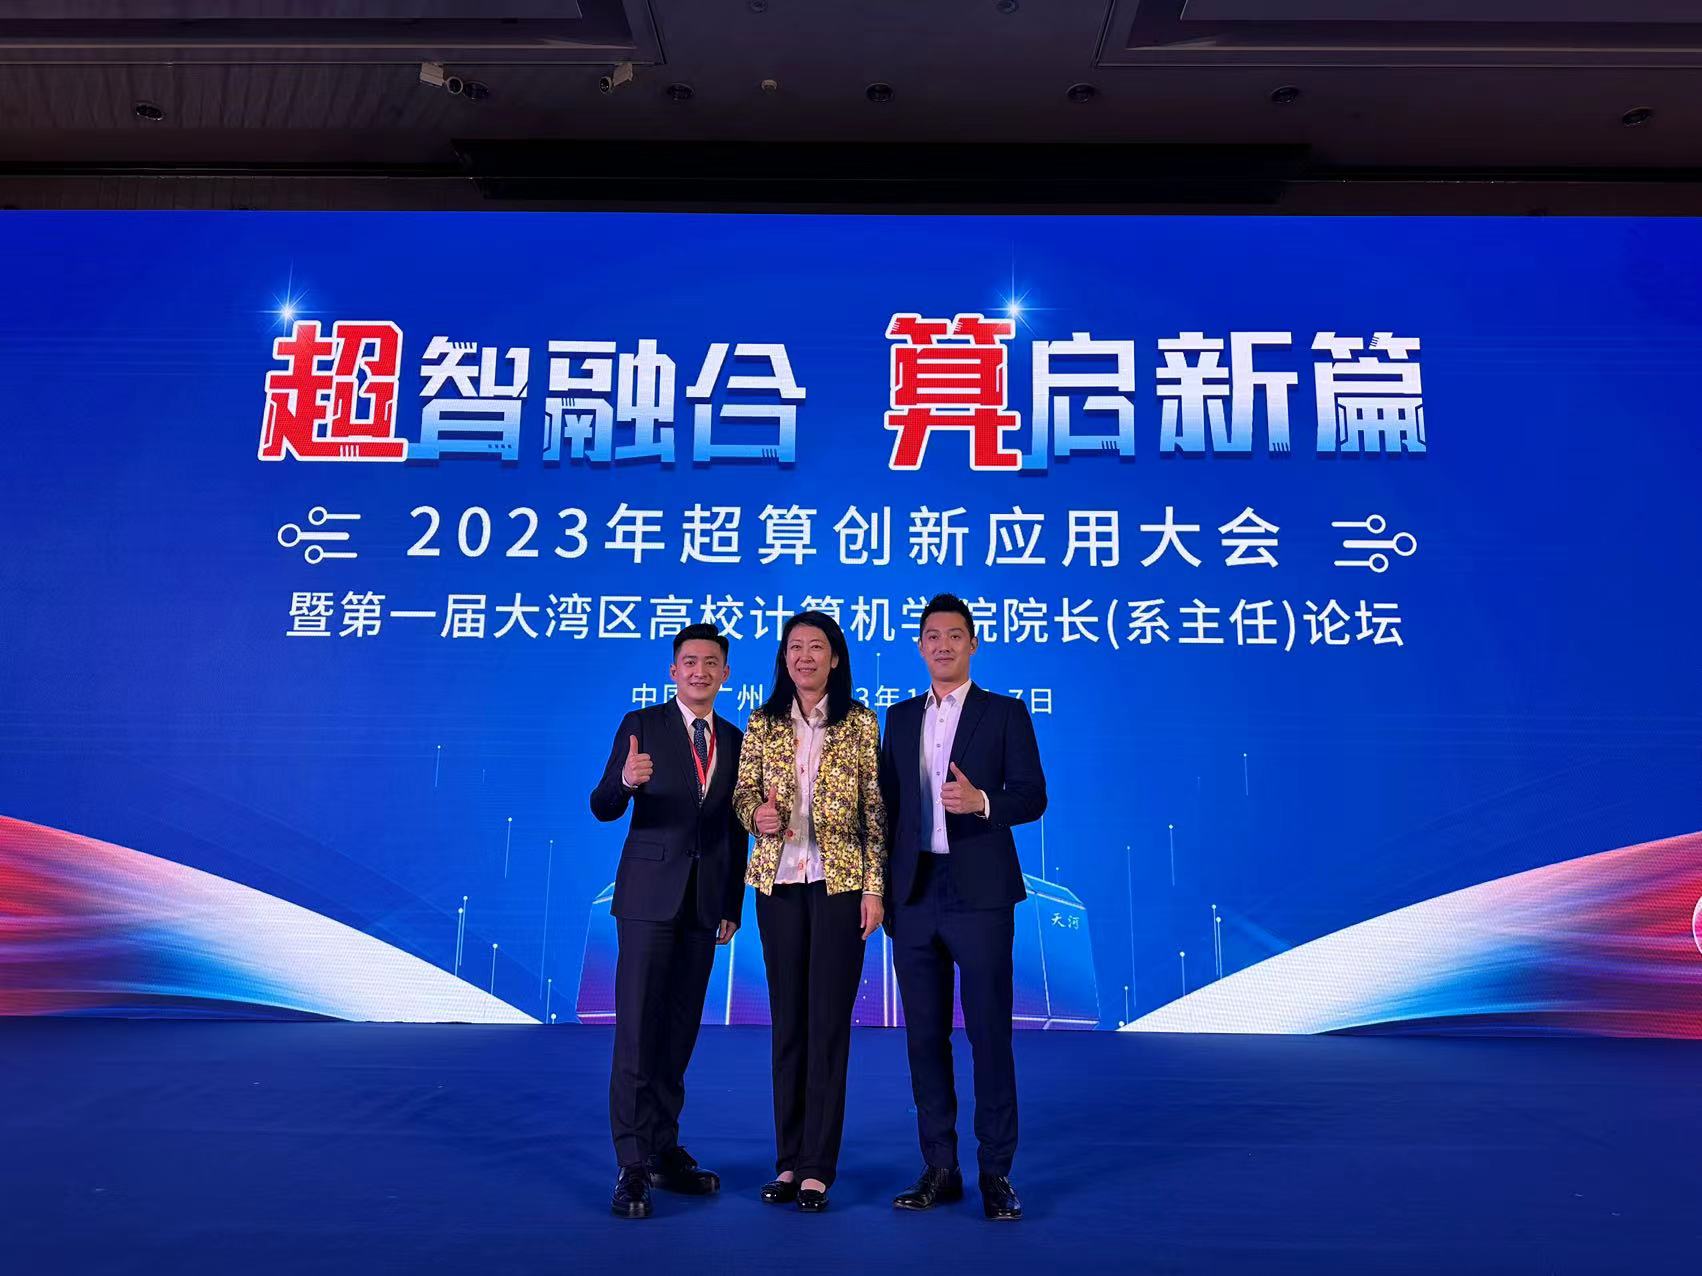 Kitson Shum (first from left), Directors of the National Supercomputing Guangzhou/Shenzhen Center, Lu Yutong (middle), and Bon Cheung (first from right) at the 2023 Supercomputing Innovation and Application Conference.